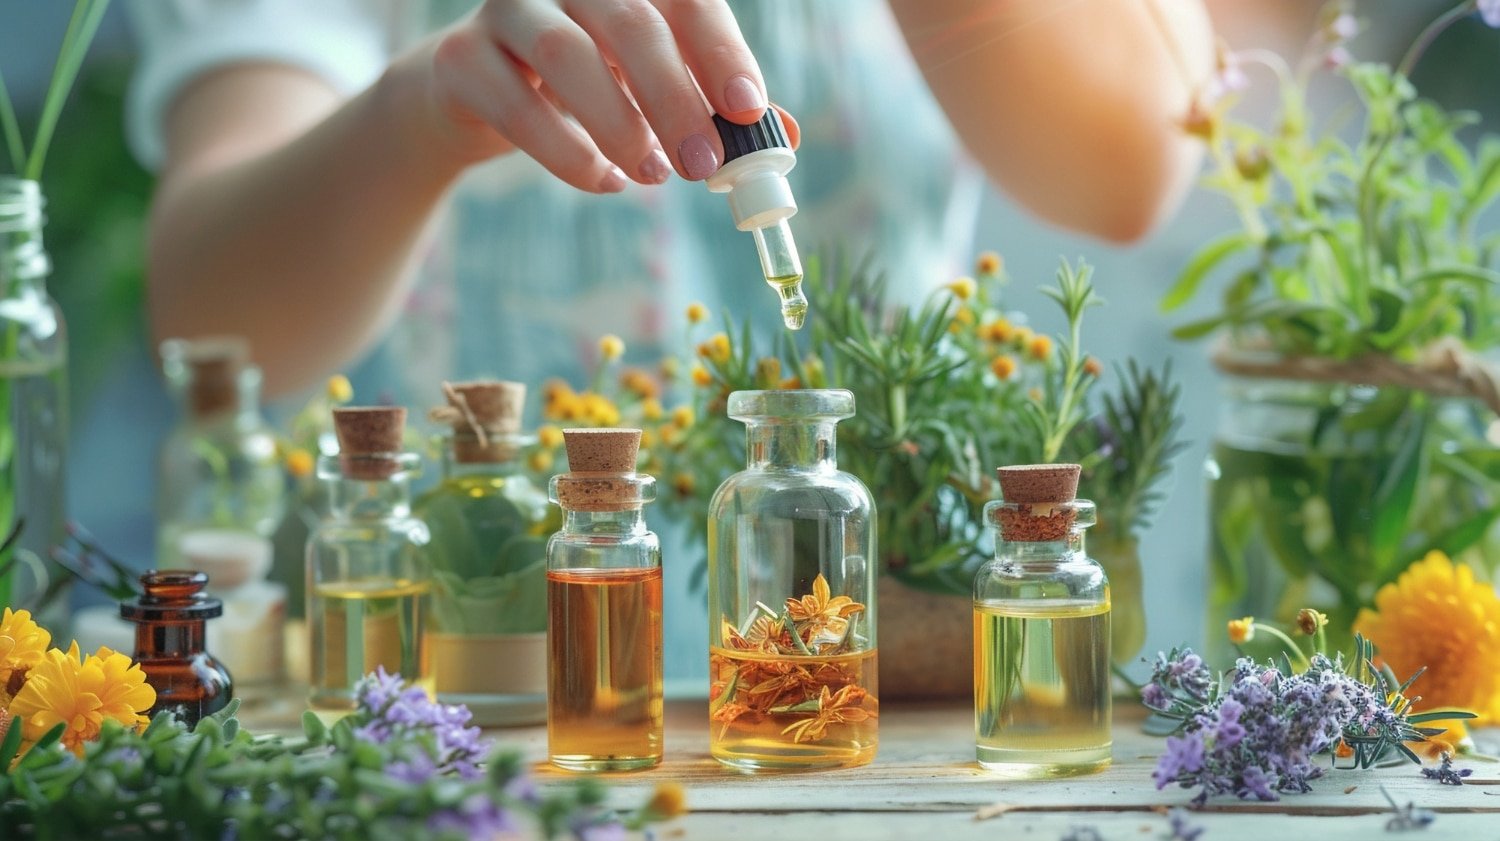 You are currently viewing Discover Natural Remedies At Farmacia Guacci’s Traditional Pharmacy